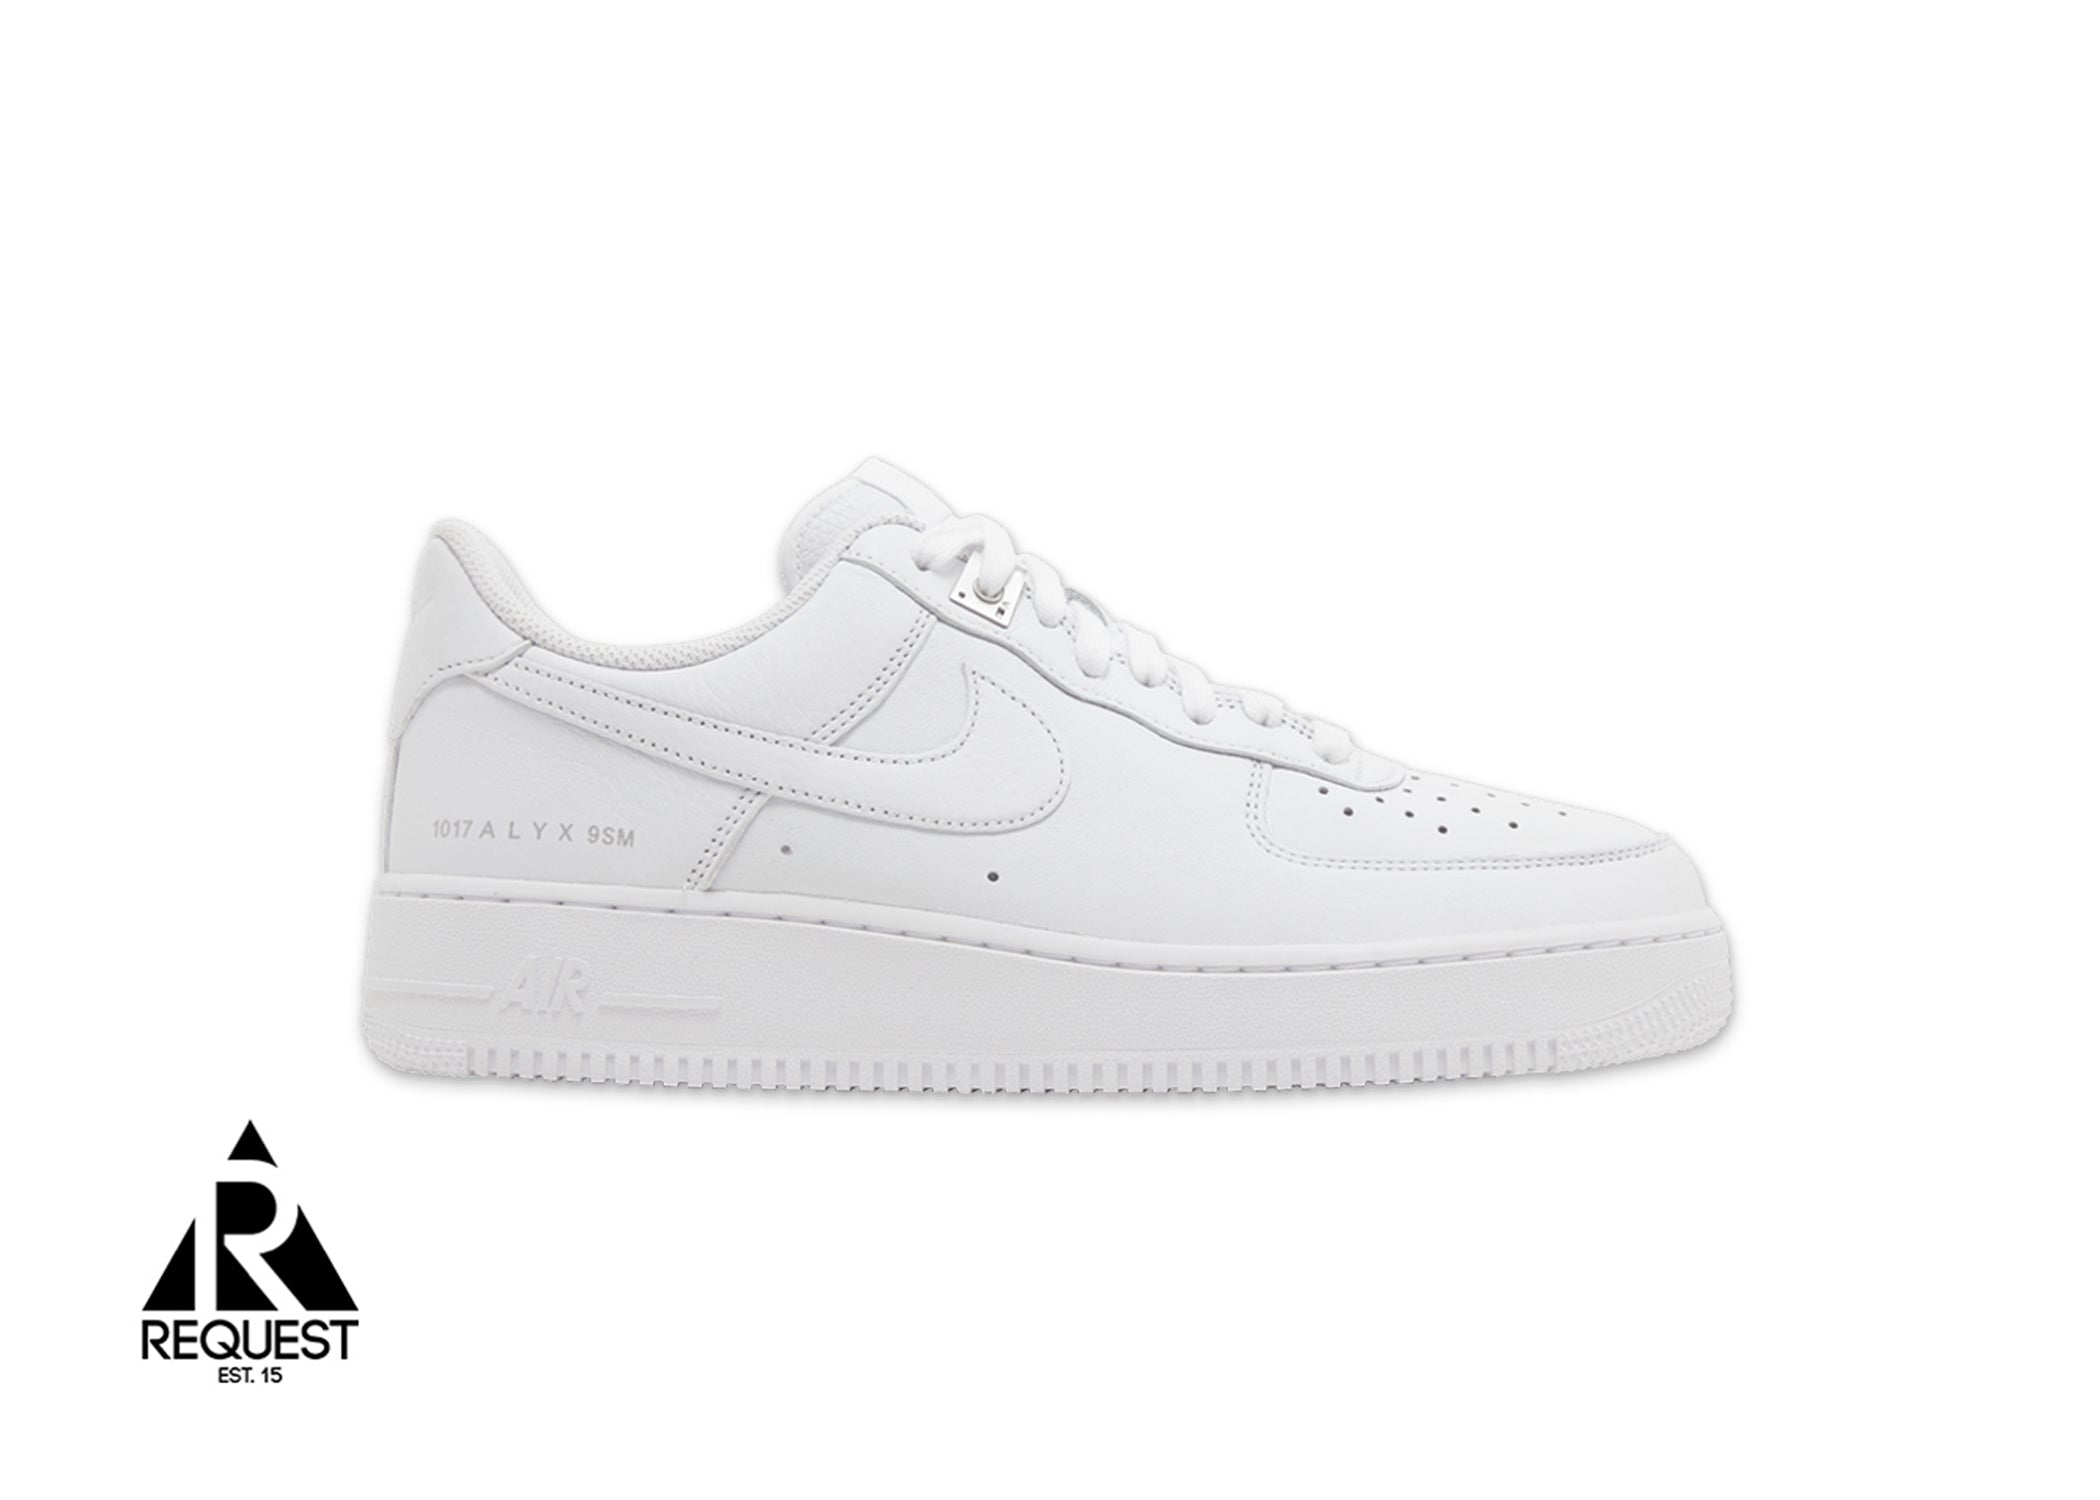 Nike Air Force 1 Low SP "1017 ALYX 9SM White"